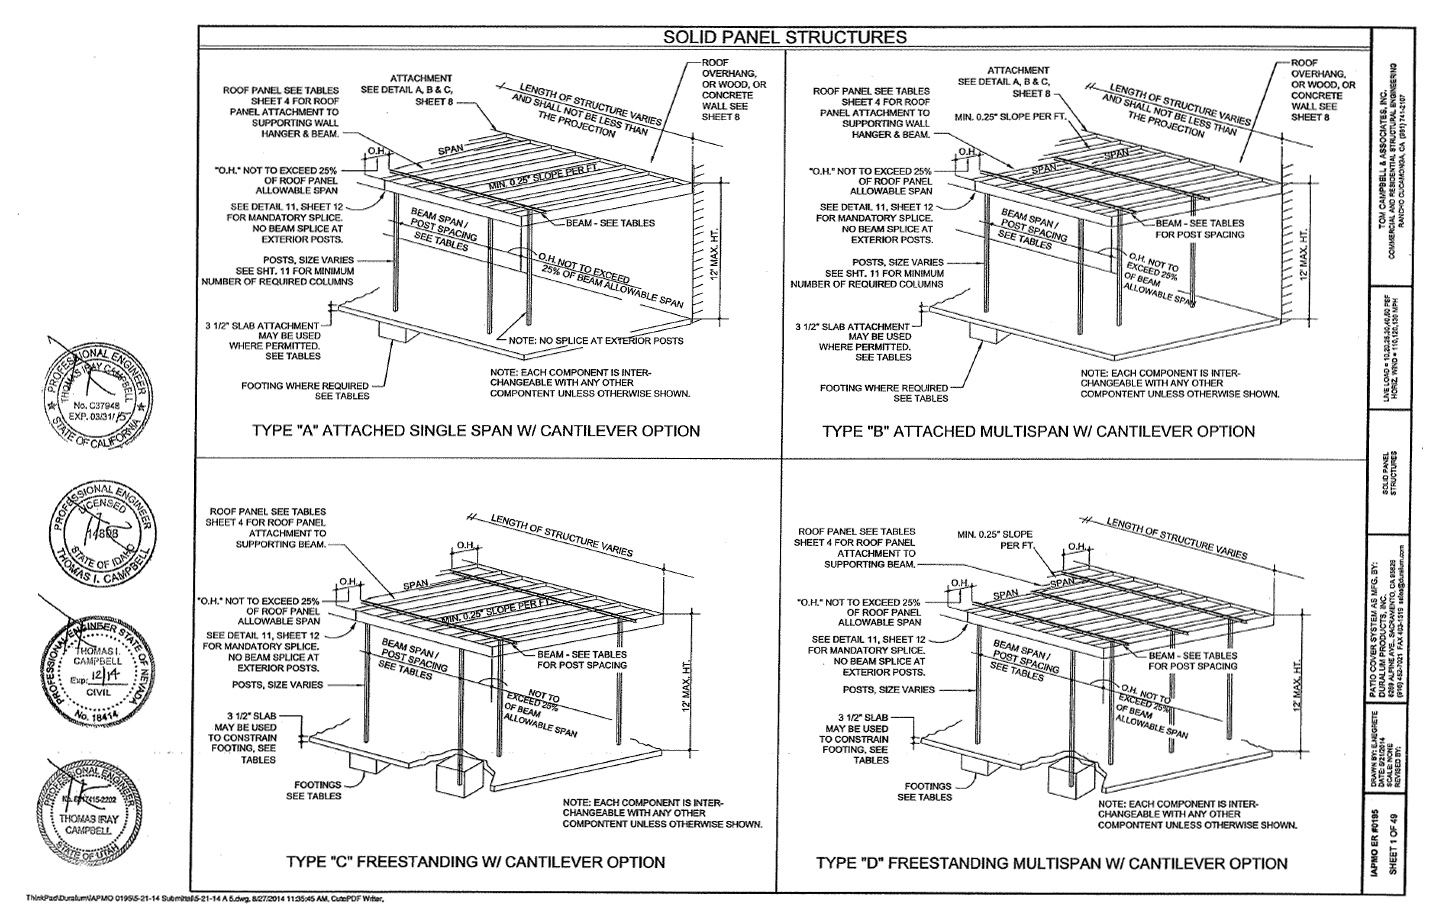 Duralum Products, Inc. Solid Panel Structures Engineering Information